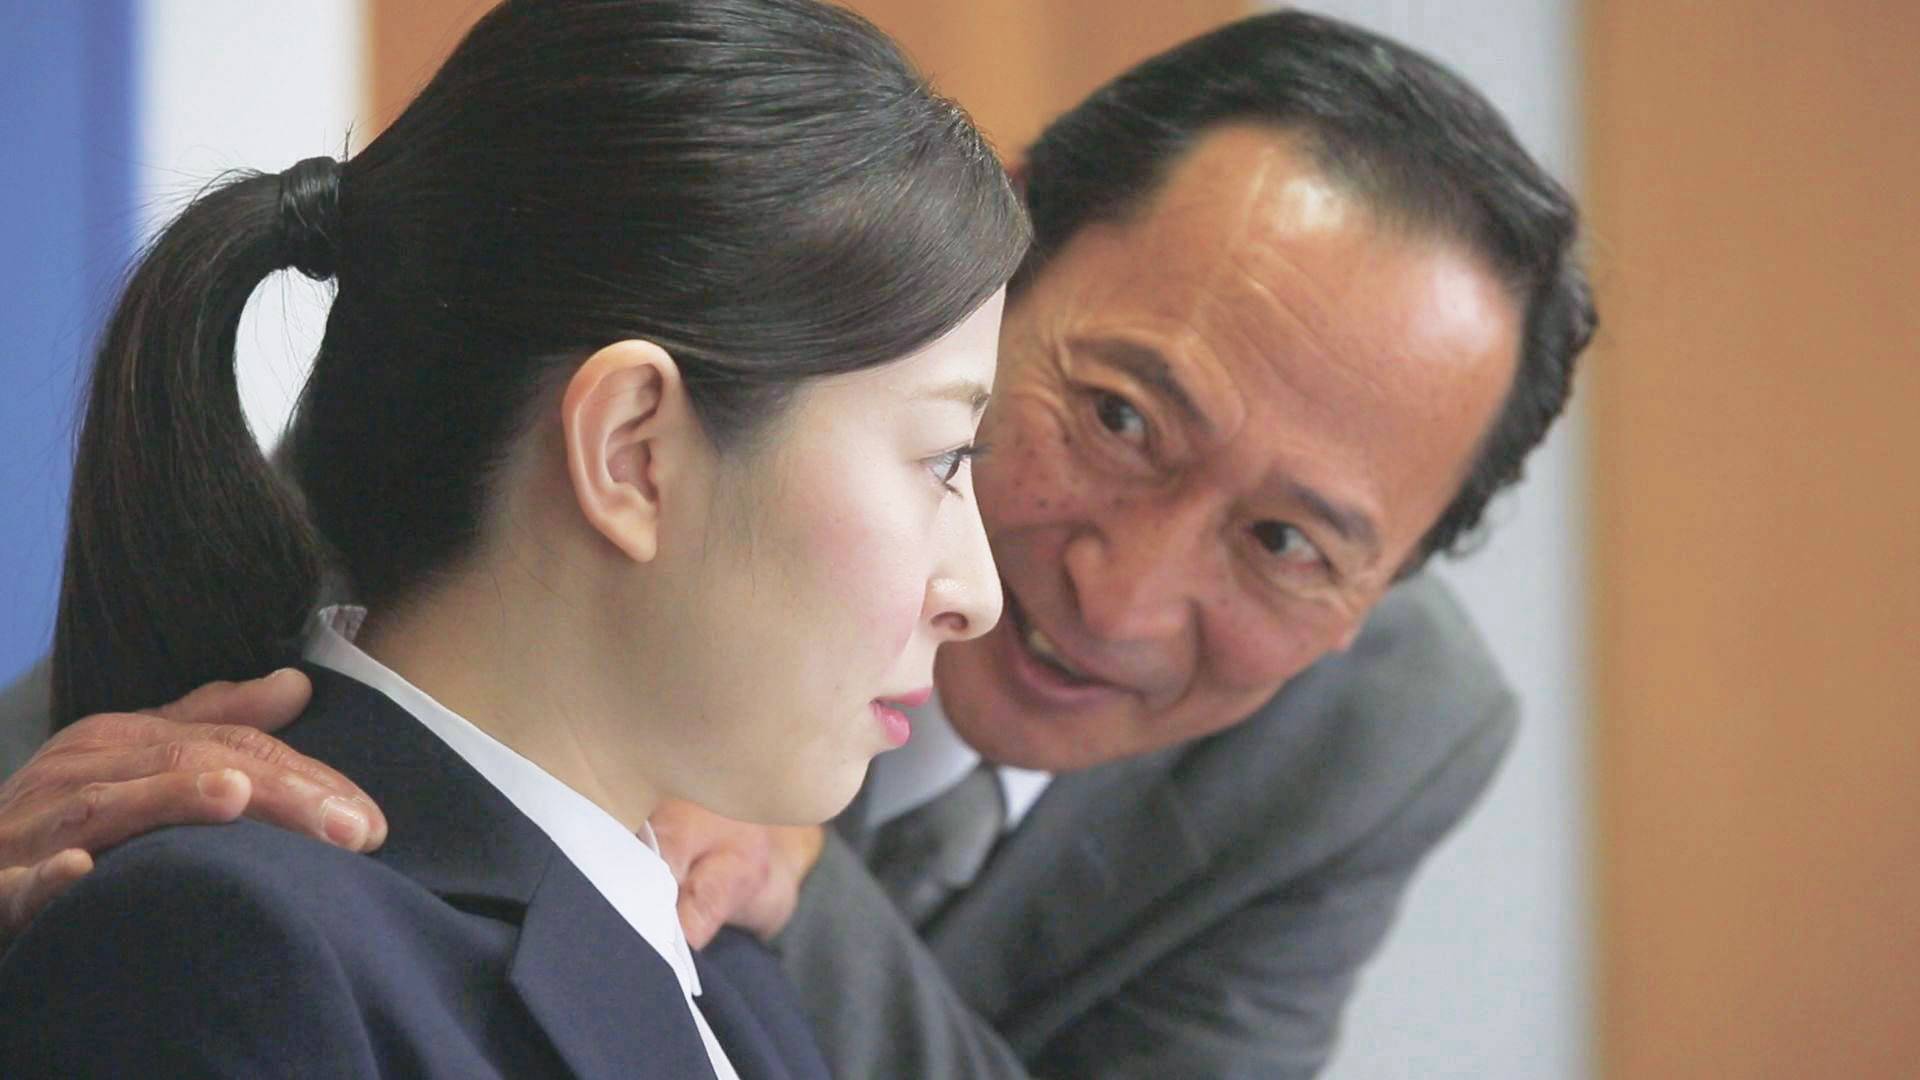 Japans government releases video to help eradicate harassment from politics